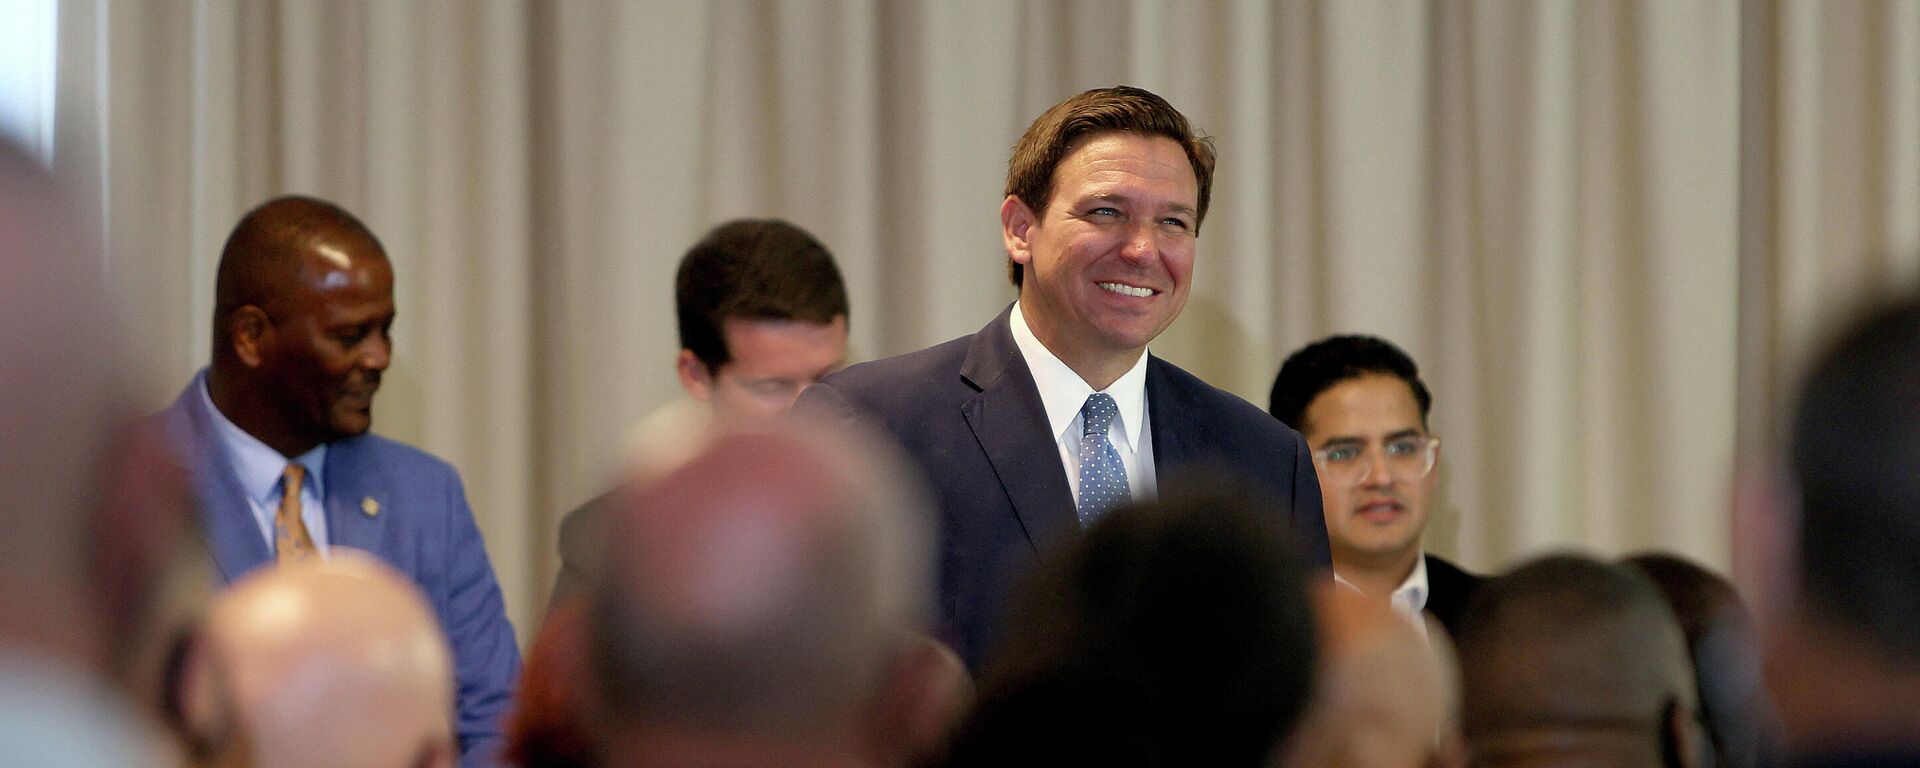 Florida Gov. Ron DeSantis speaks during an event to give out bonuses to first responders held at the Grand Beach Hotel Surfside on August 10, 2021 in Surfside, Florida. DeSantis gave out some of the $1,000 checks that the Florida state budget passed for both first responders and teachers across the state.  - Sputnik International, 1920, 10.09.2021